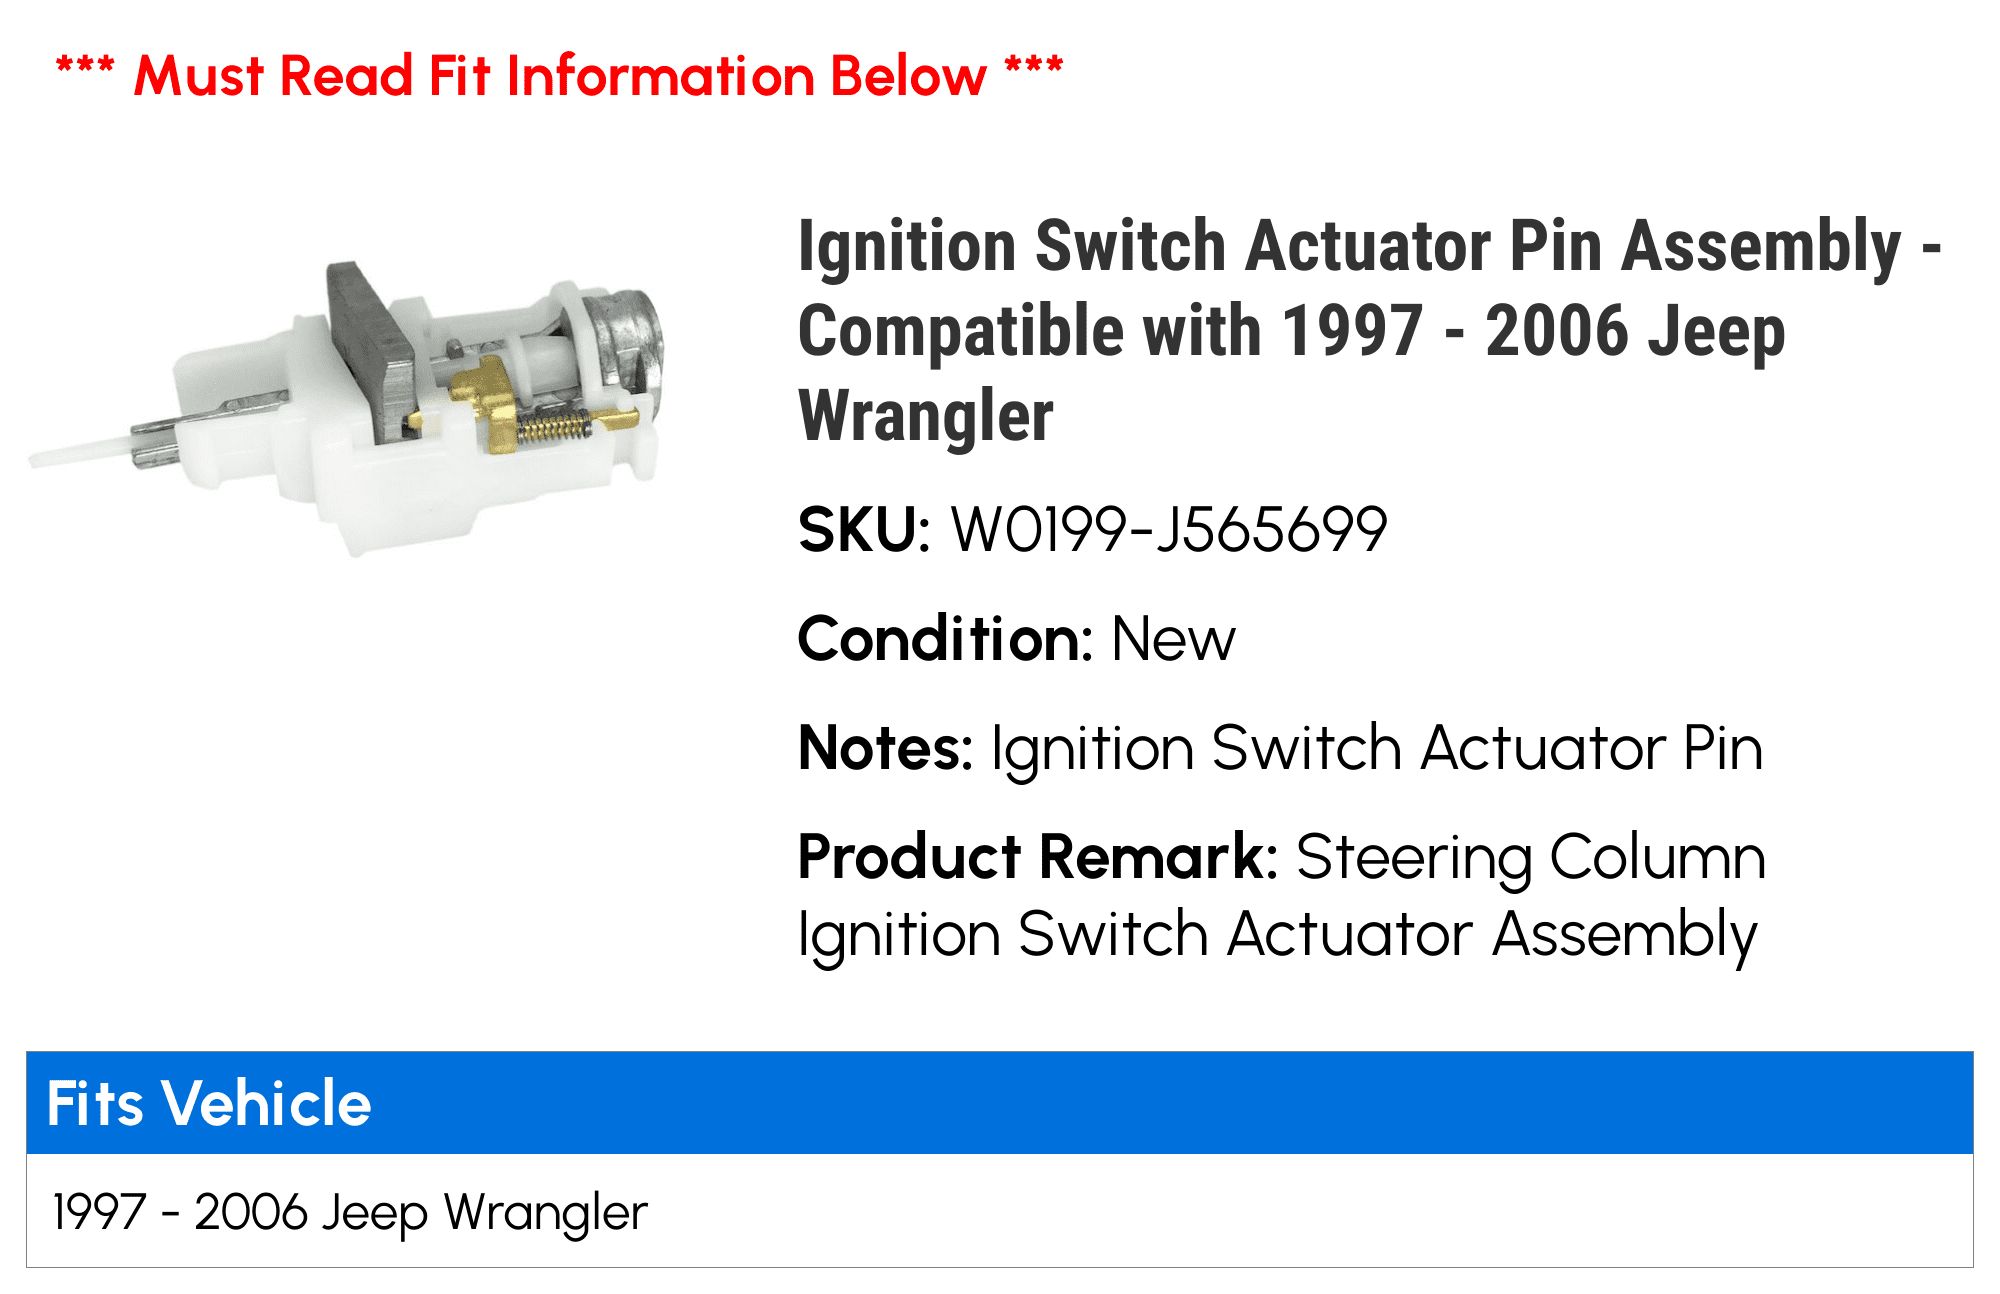 Ignition Switch Actuator Pin Assembly - Compatible with 1997 - 2006 Jeep  Wrangler 1998 1999 2000 2001 2002 2003 2004 2005 